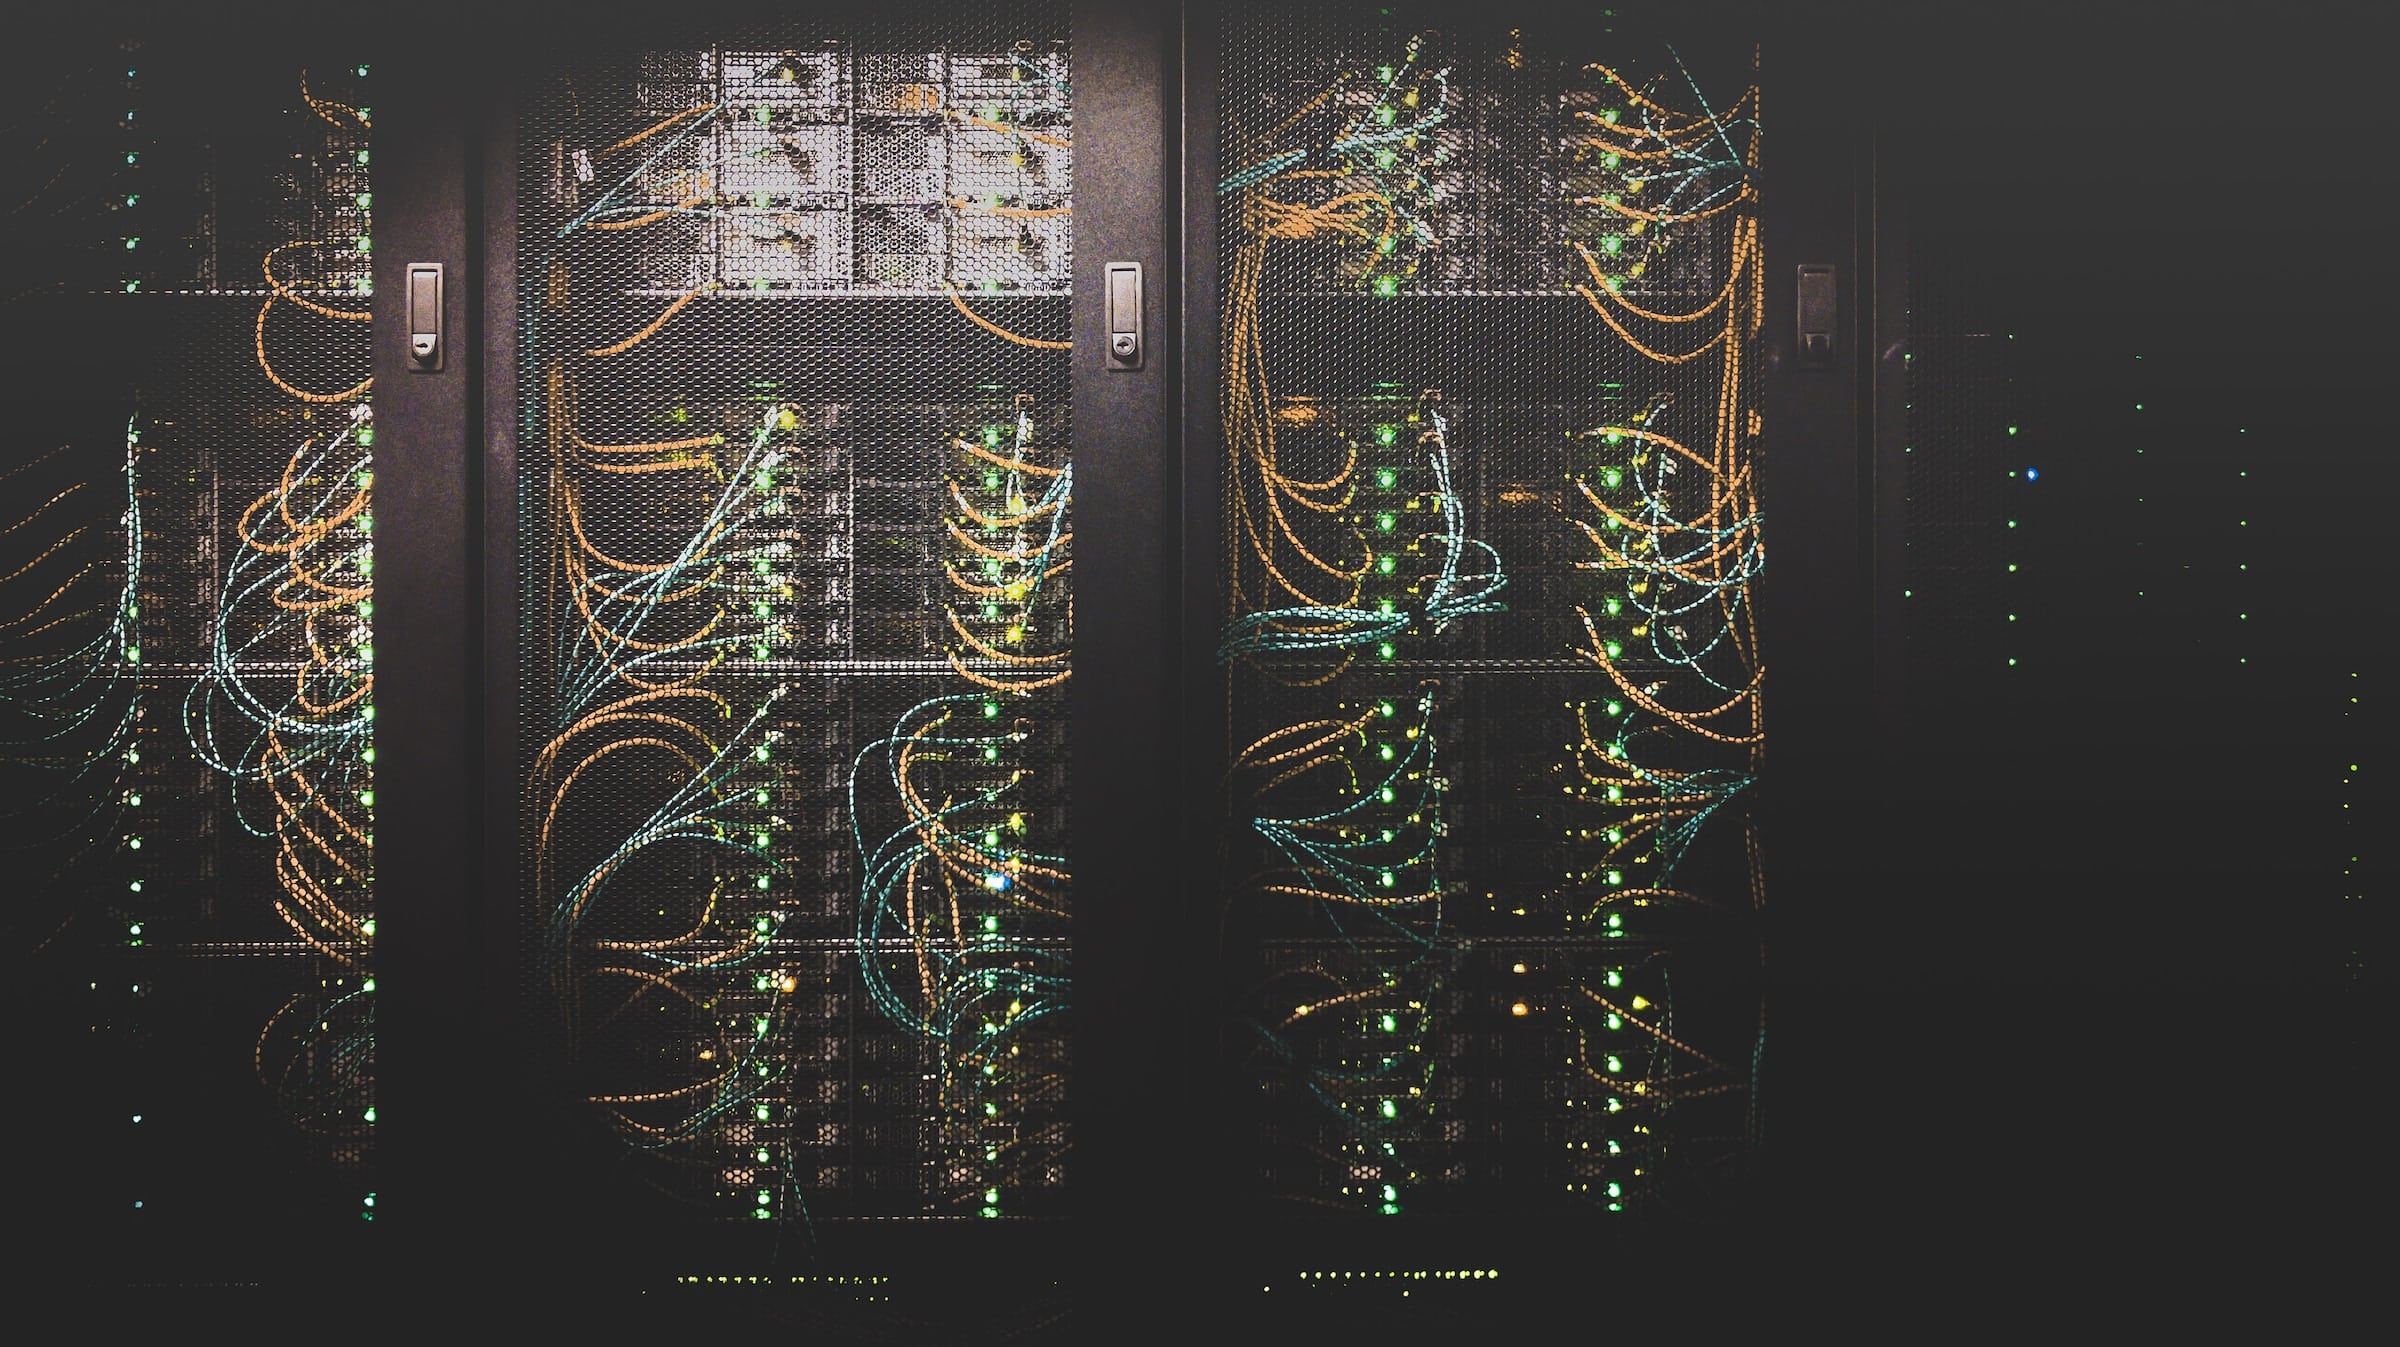 A mainframe of data storage, representing privacy law and data security solutions in Waterloo